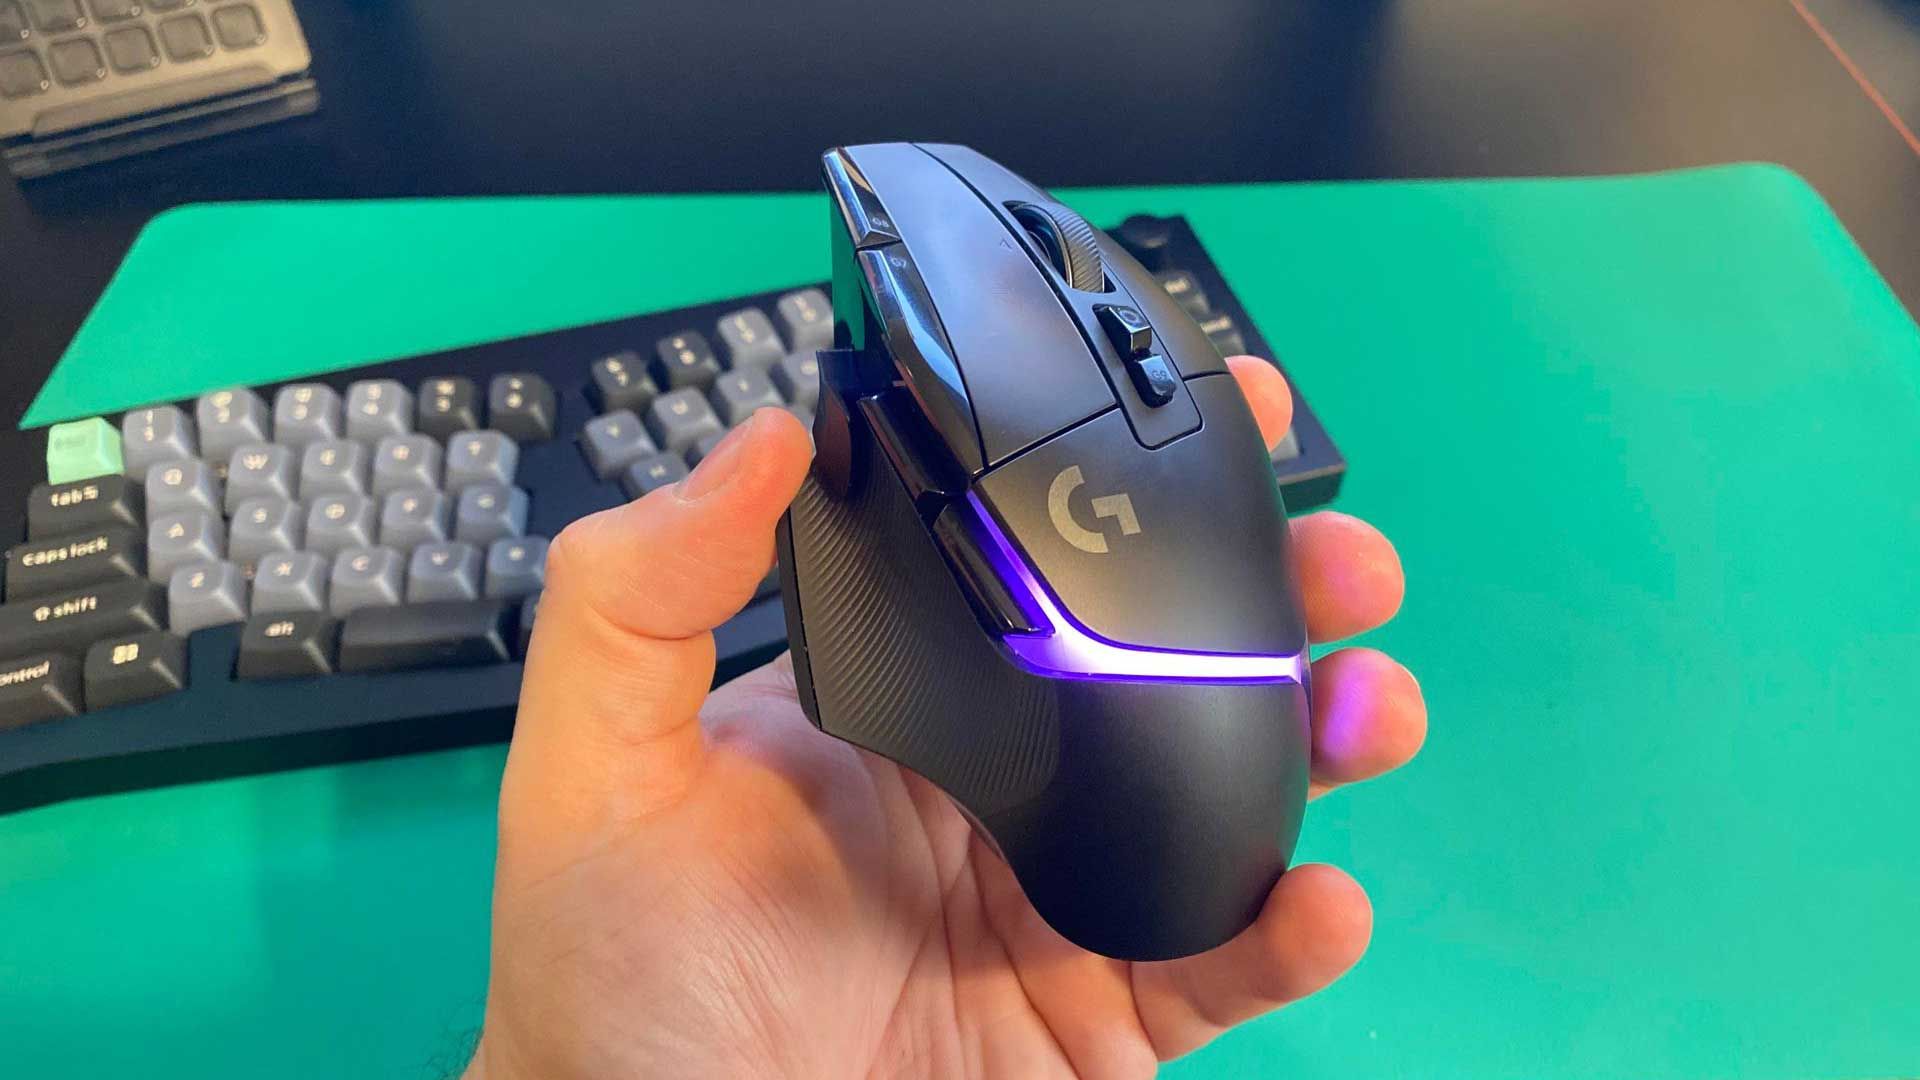 Logitech G502 X Plus vs Lightspeed review: Which one should you buy? -  Mirror Online